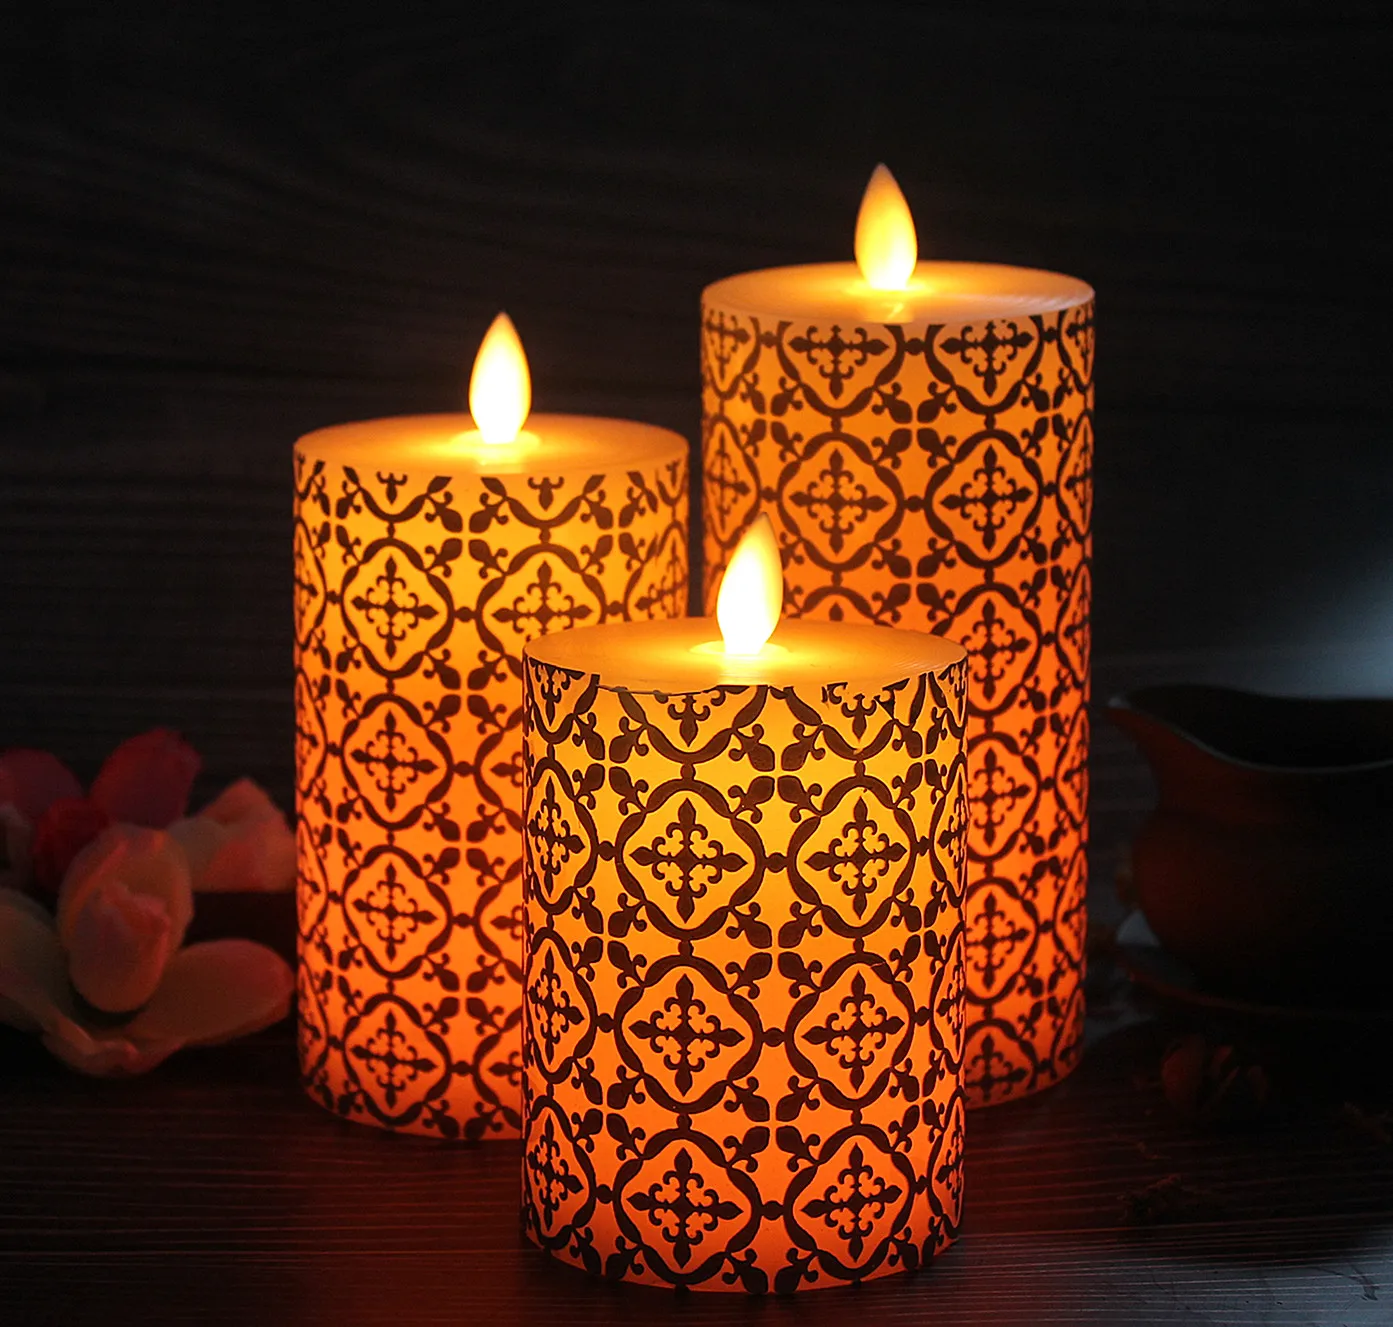 
Wedding decoration centerpieces faraffin wax flameless LED scented candle 